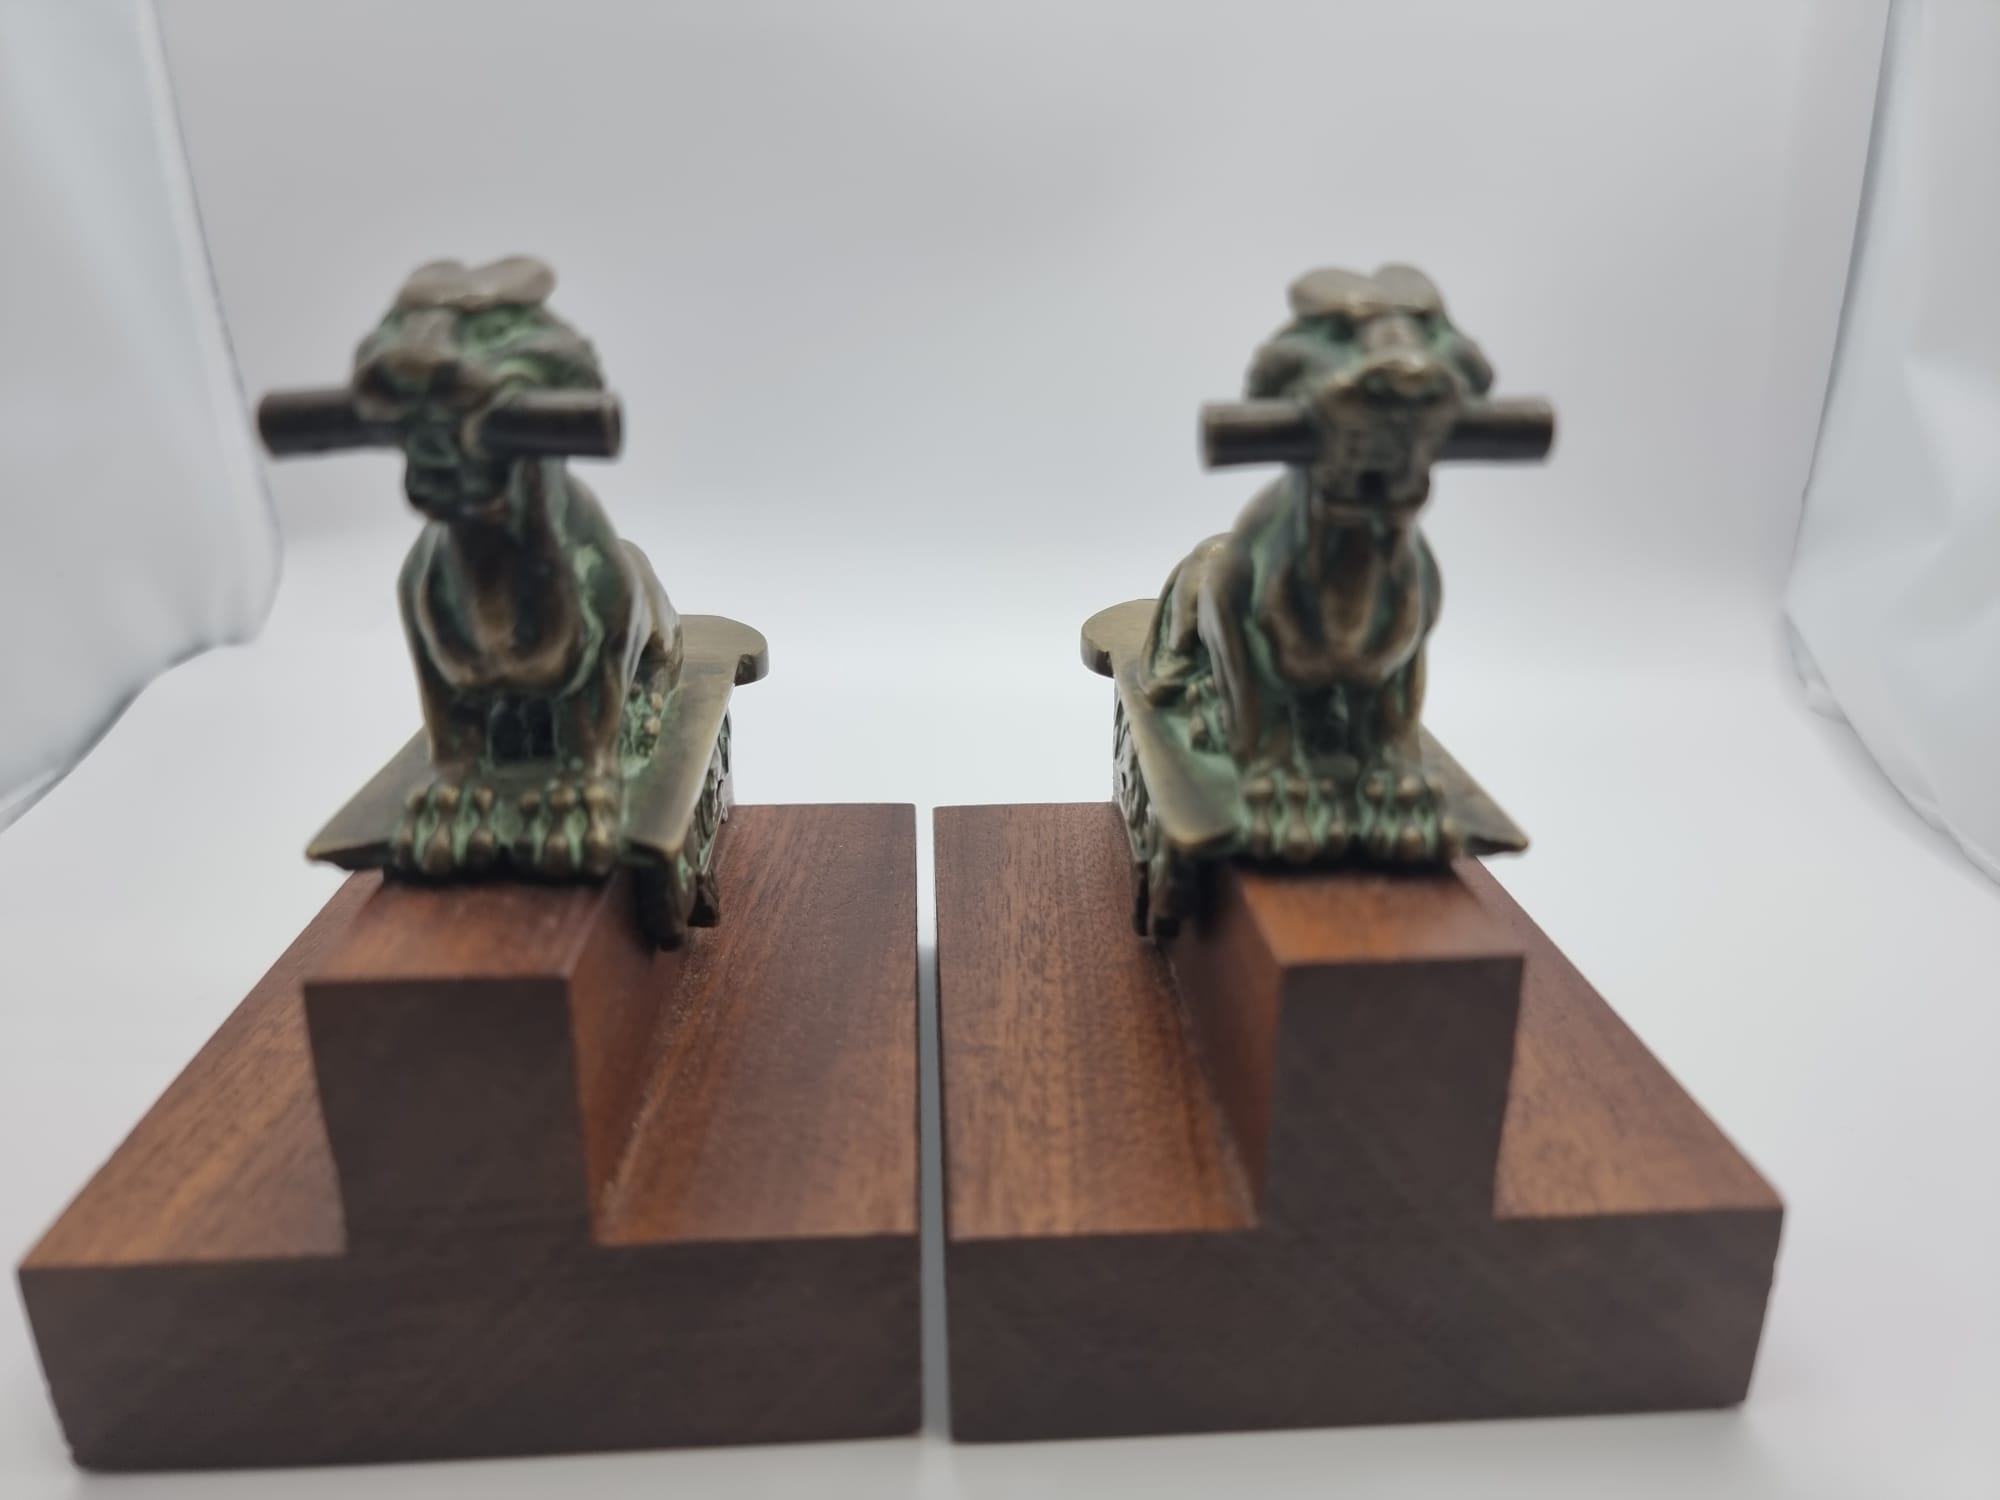 Pair Of 19th Century Decorative Bronze Lions later added to wooden plinth thus converted as Bookends - Image 6 of 10